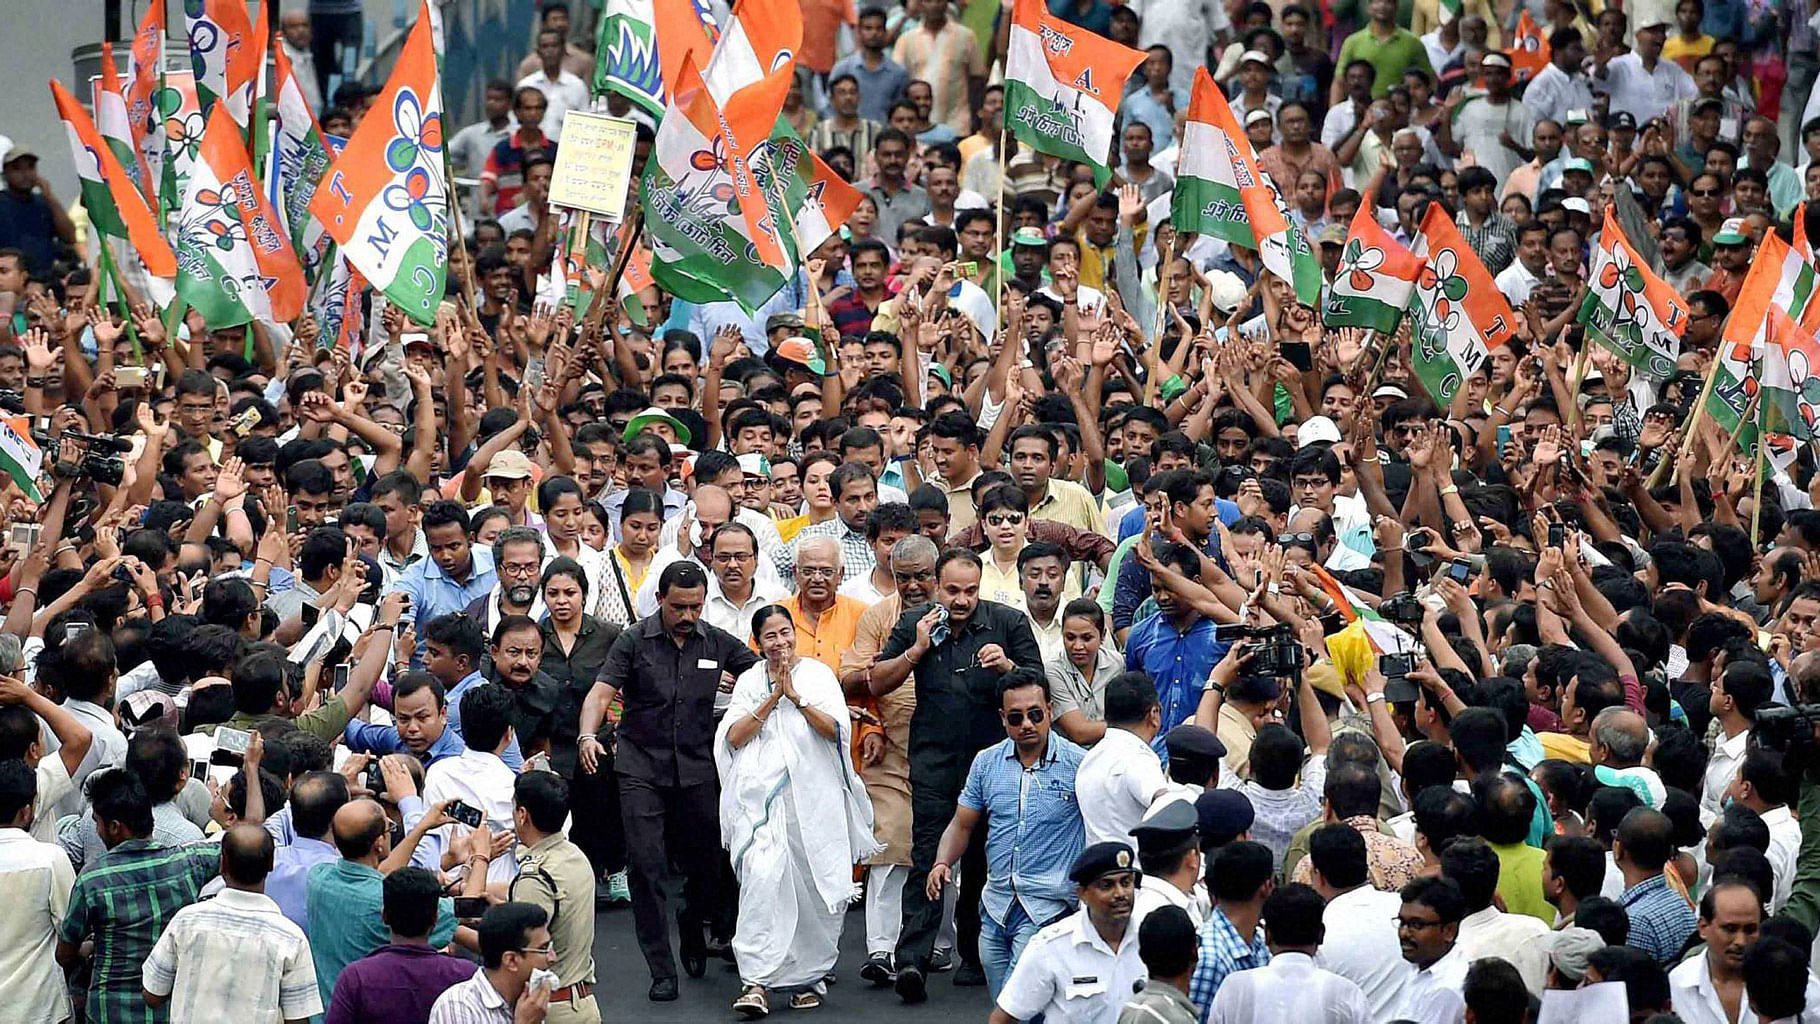 W. Bengal Chief Minister and TMC Supremo Mamata Banerjee at an election campaign rally in support of party candidates in Kolkata on Thursday. (Photo Courtesy: PTI) 